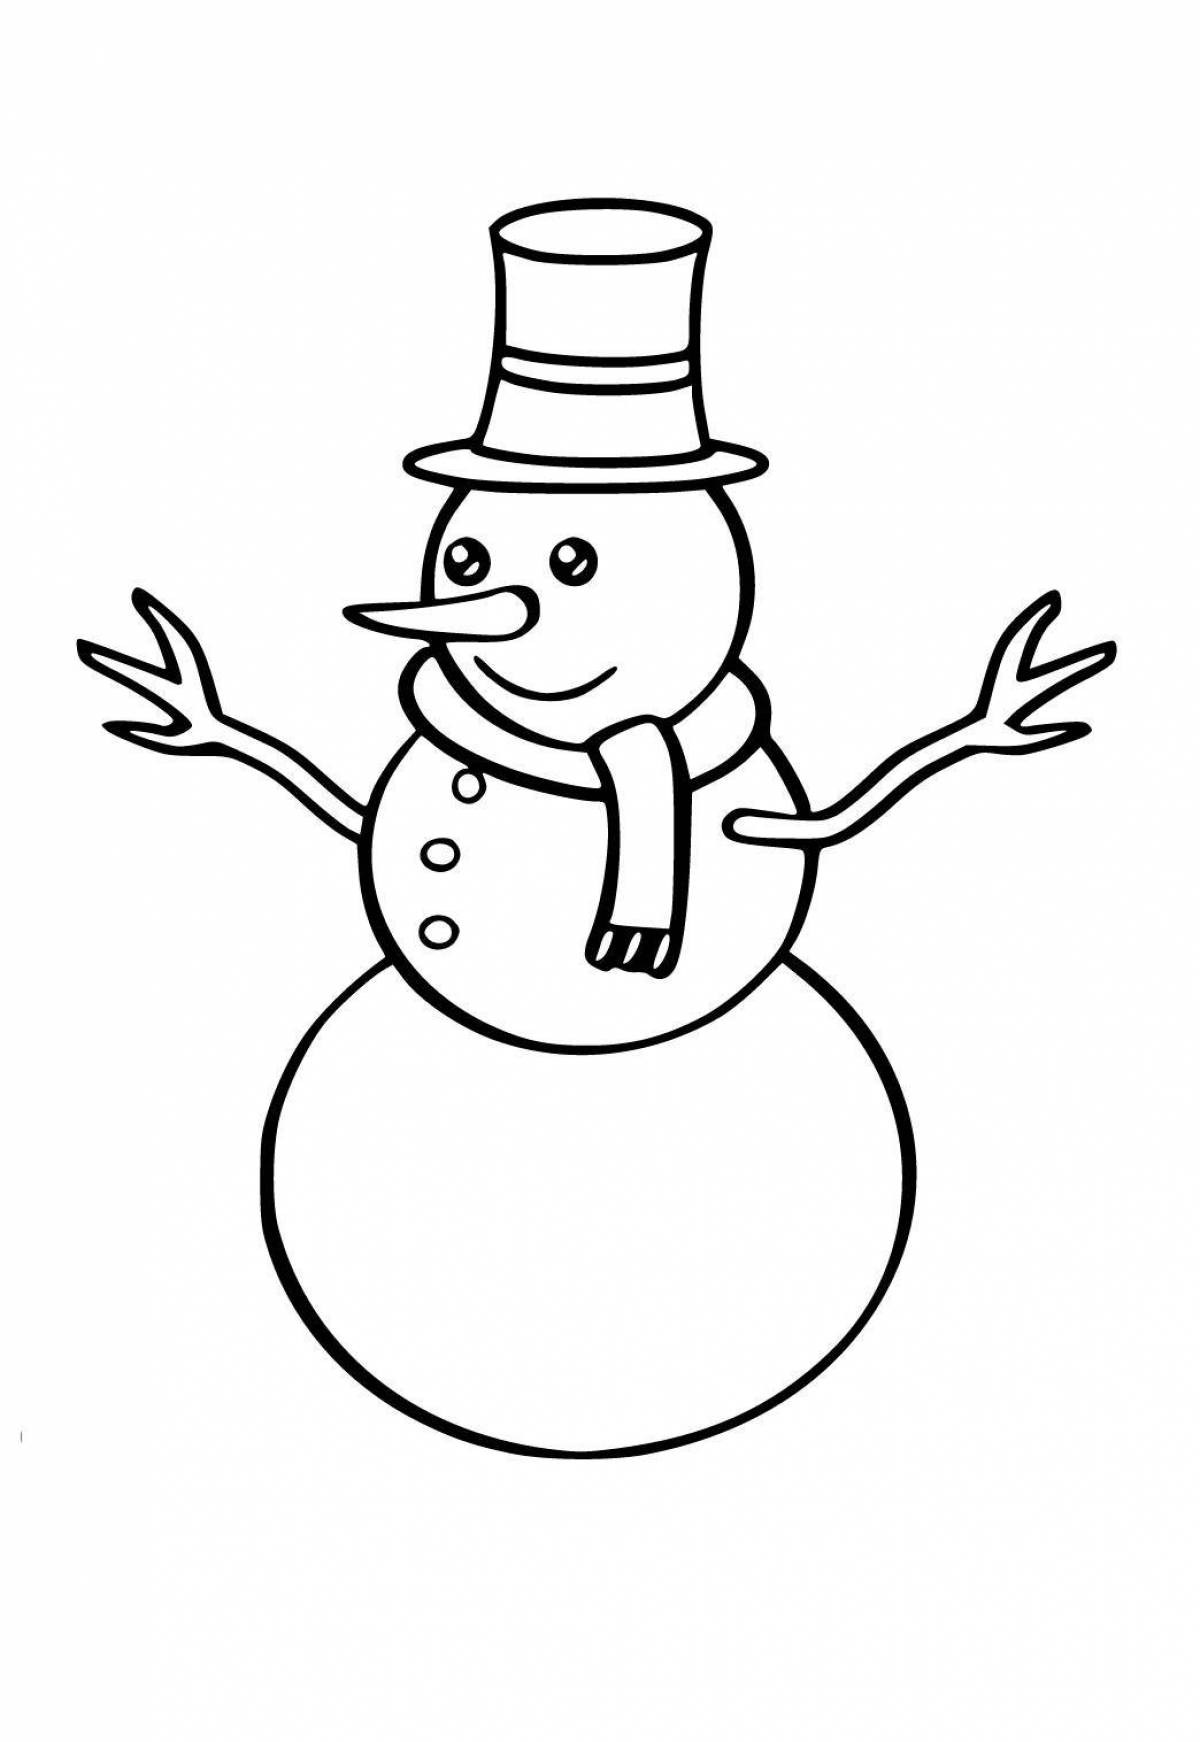 Magic snowman coloring book for kids 5 6